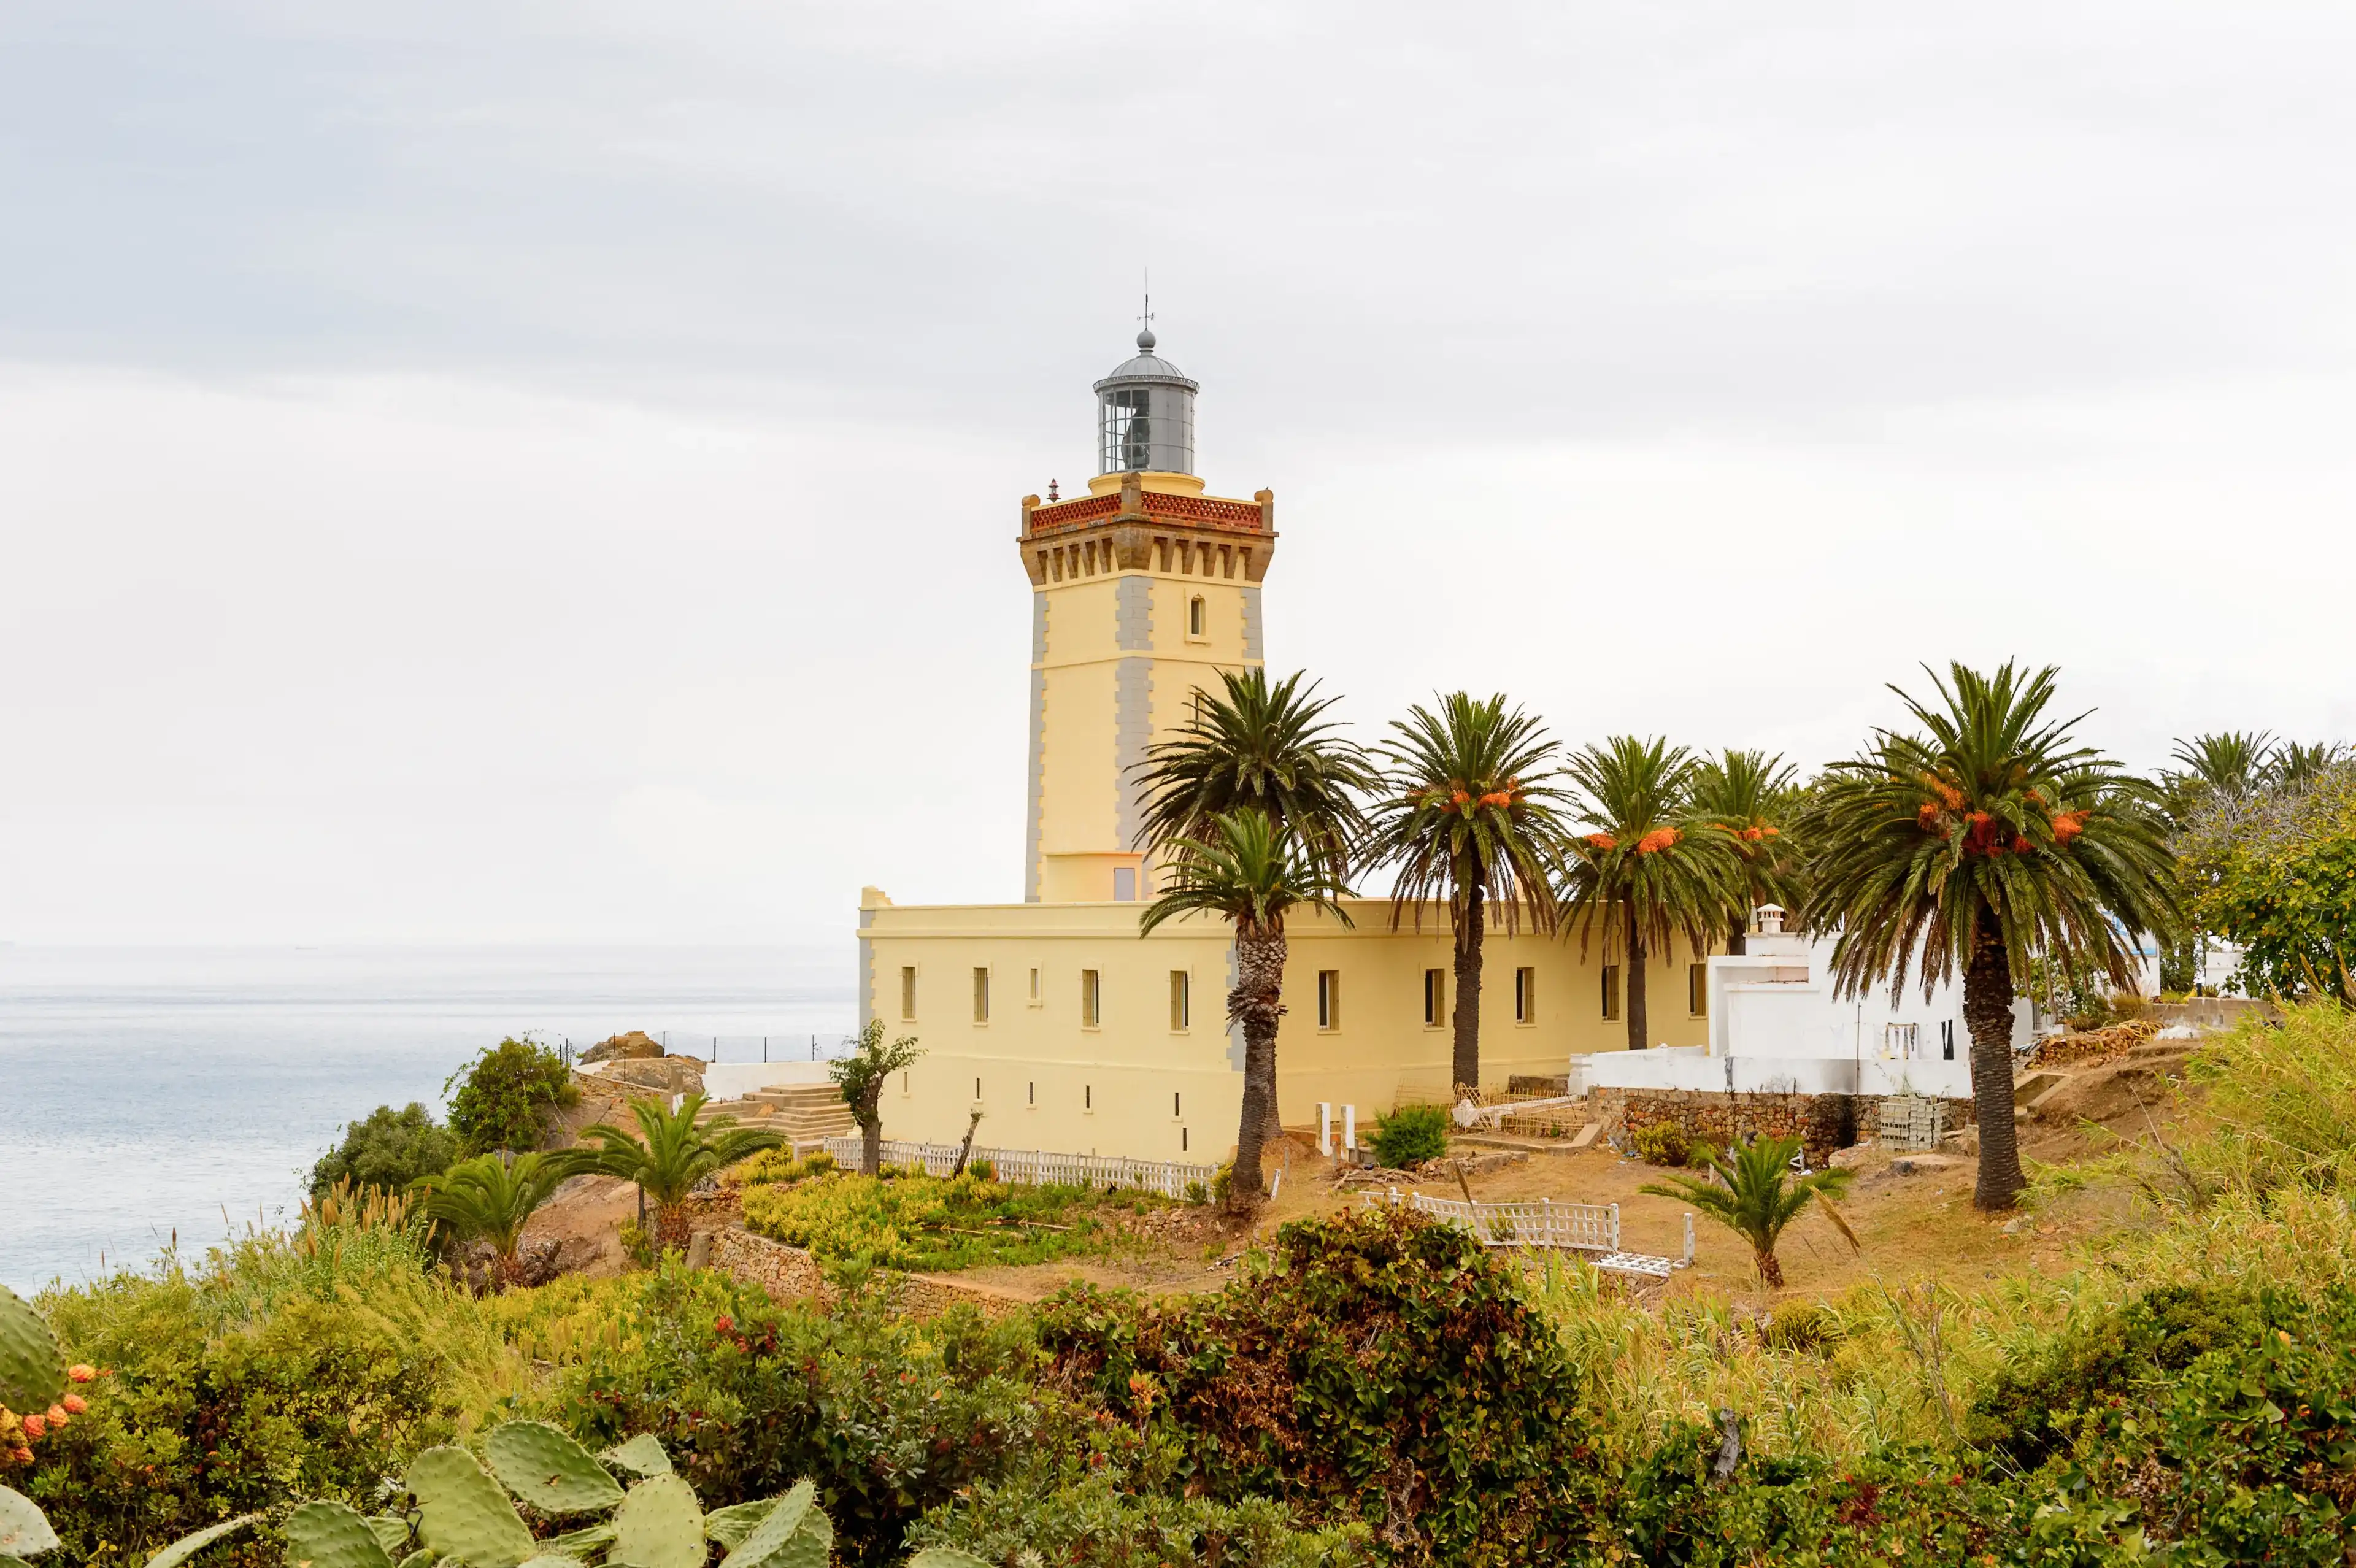 Spartel lighthouse of Tangier, a major city in northern Morocco. It is the capital of the Tanger-Tetouan-Al Hoceima Region and of the Tangier-Assilah prefecture of Morocco.